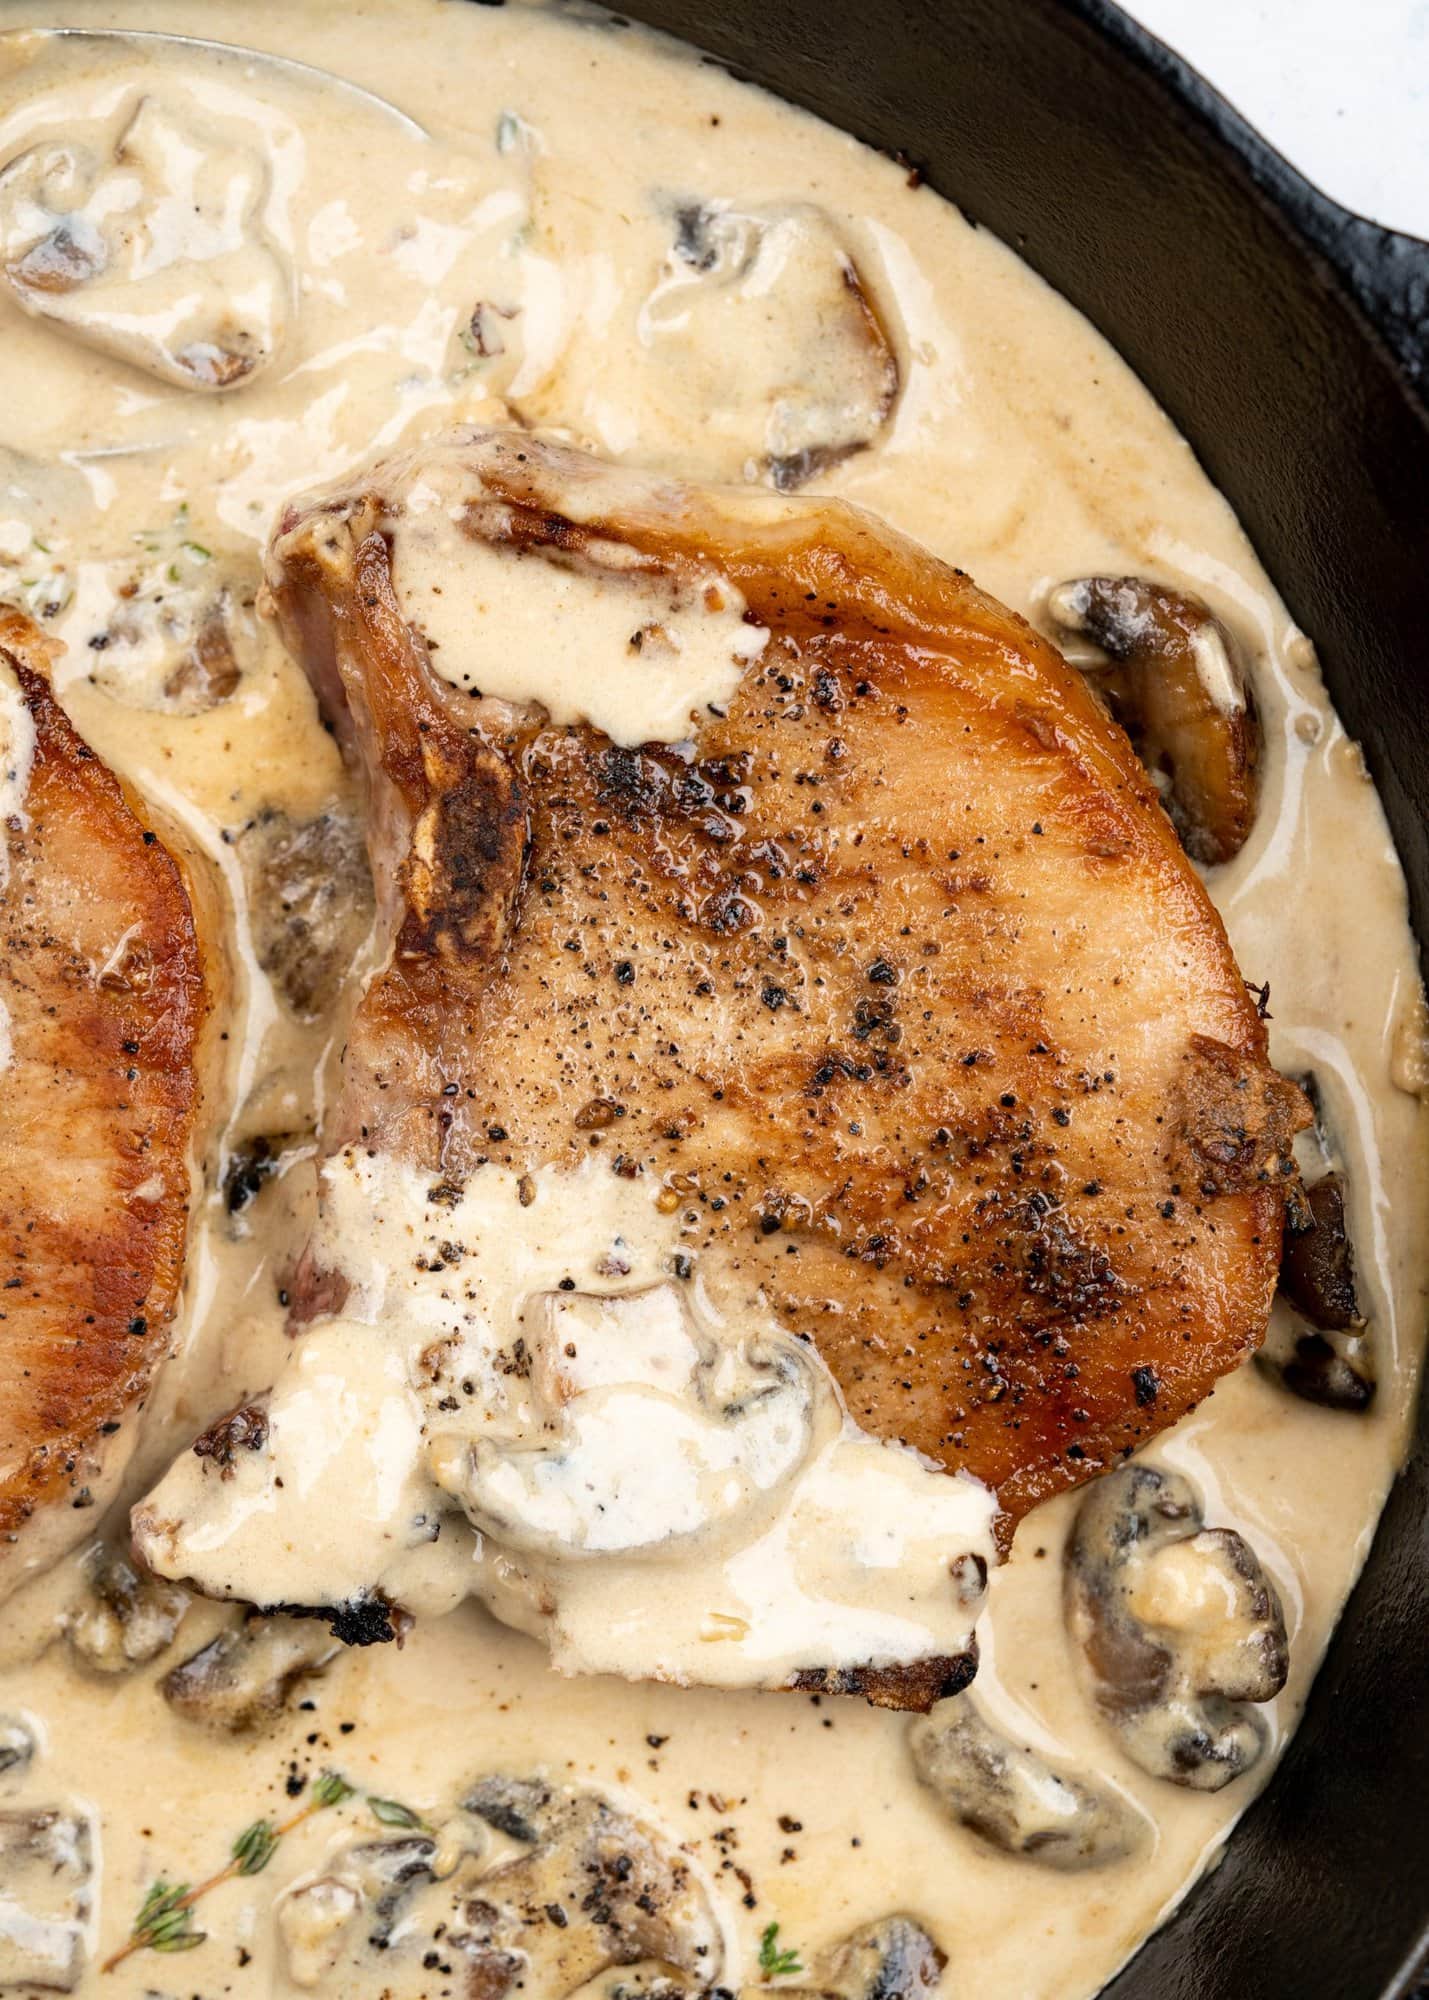 Close up image of seared pork chop with a golden brown crust in a sea of creamy mushroom sauce, made in a black skillet.